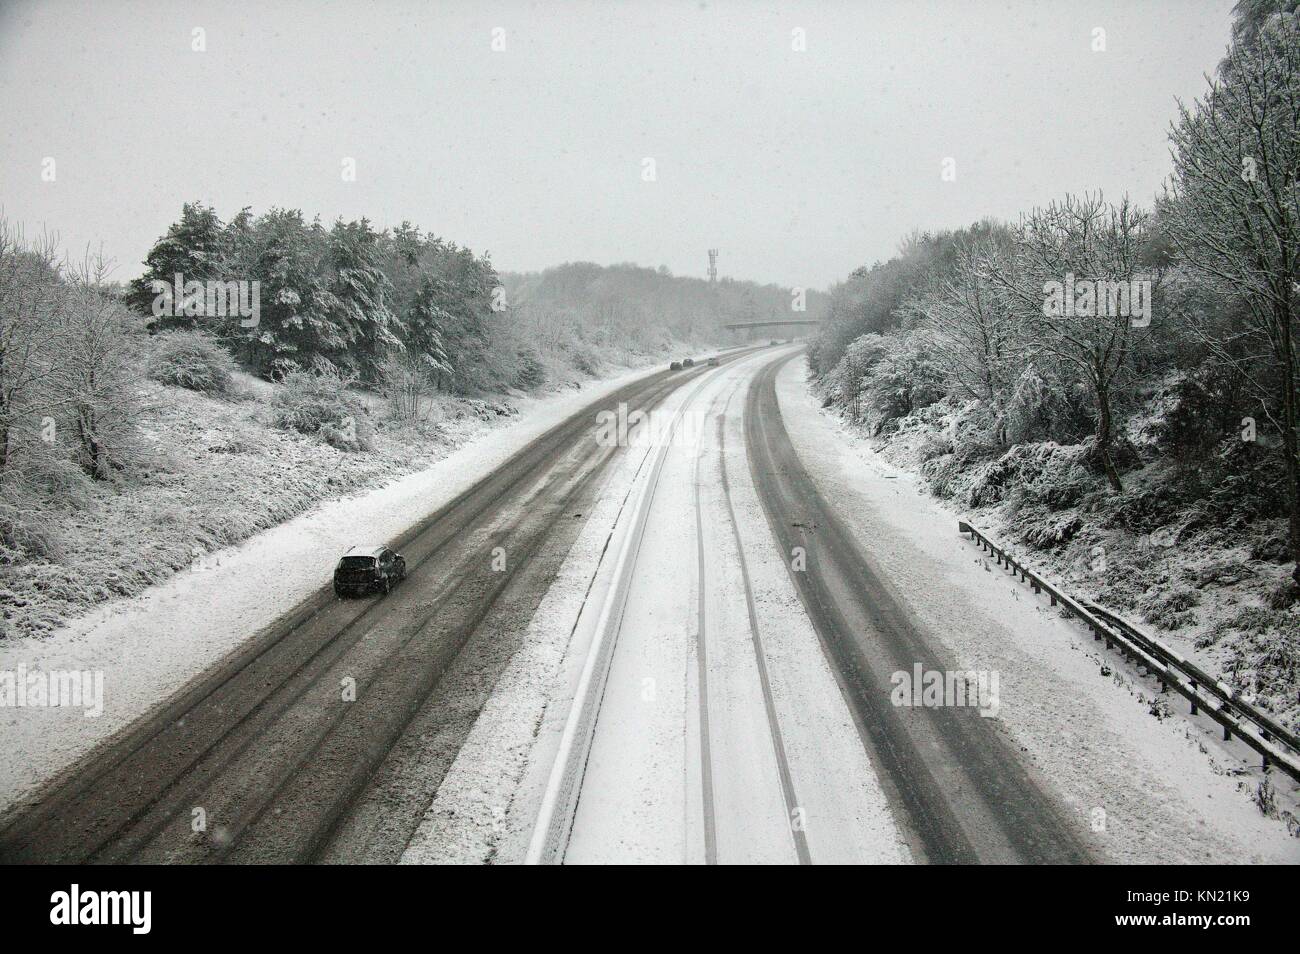 M11 Reduced to one lane southbound due to heavy snow Credit: Knelstrom Ltd/Alamy Live News Stock Photo